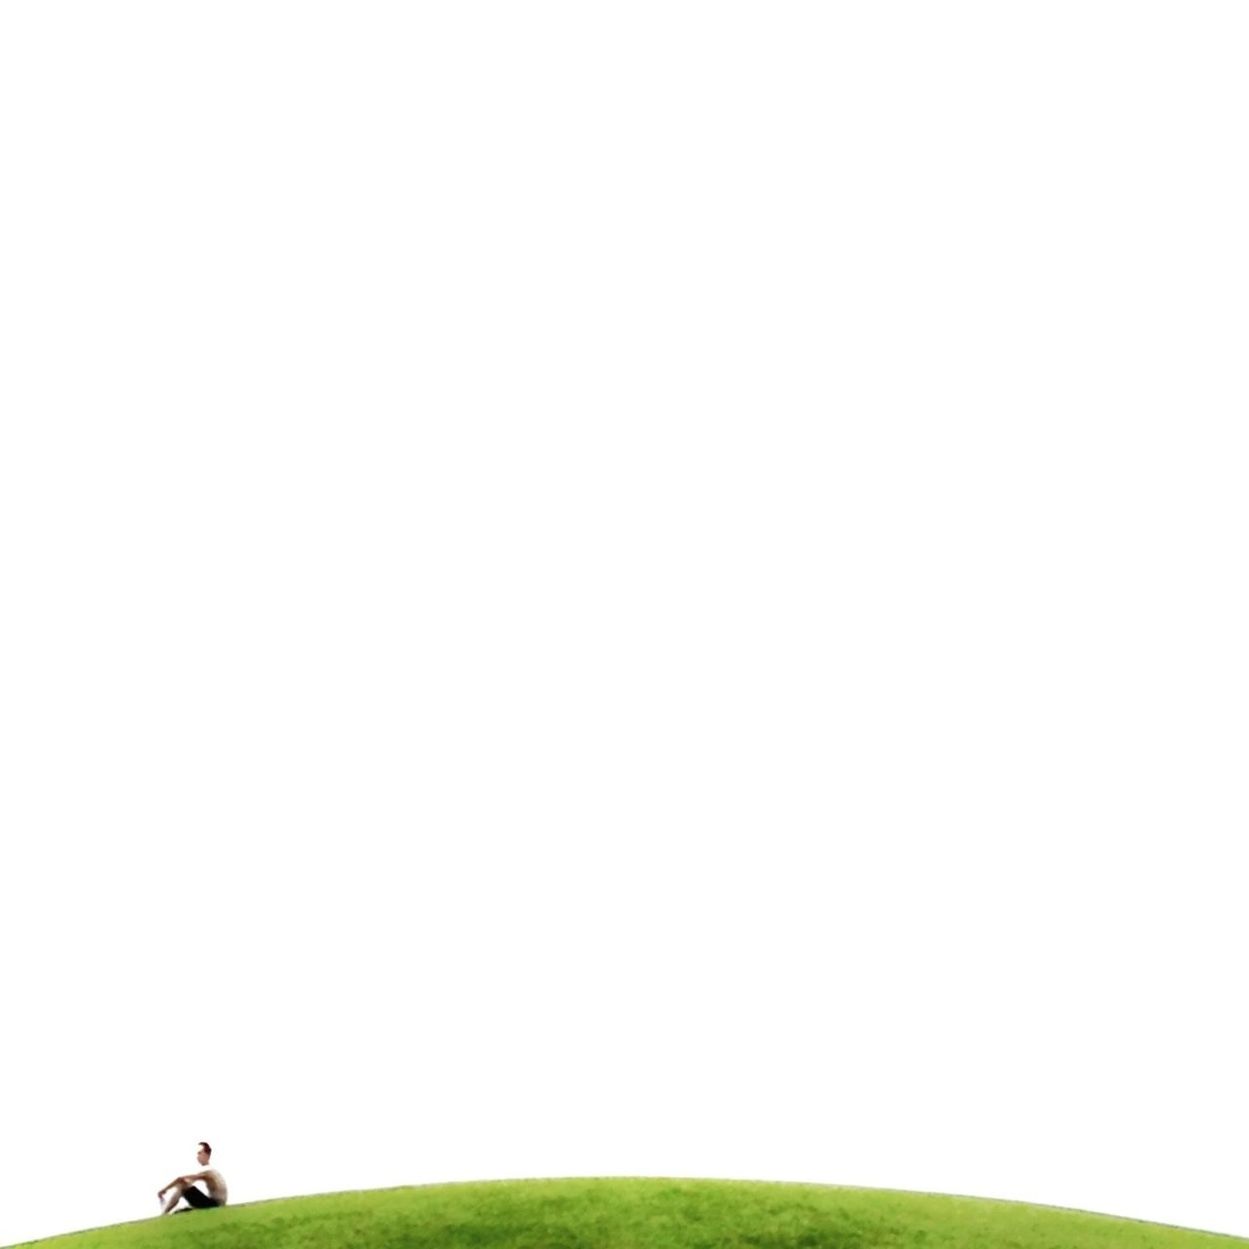 Man sitting on hill against clear sky